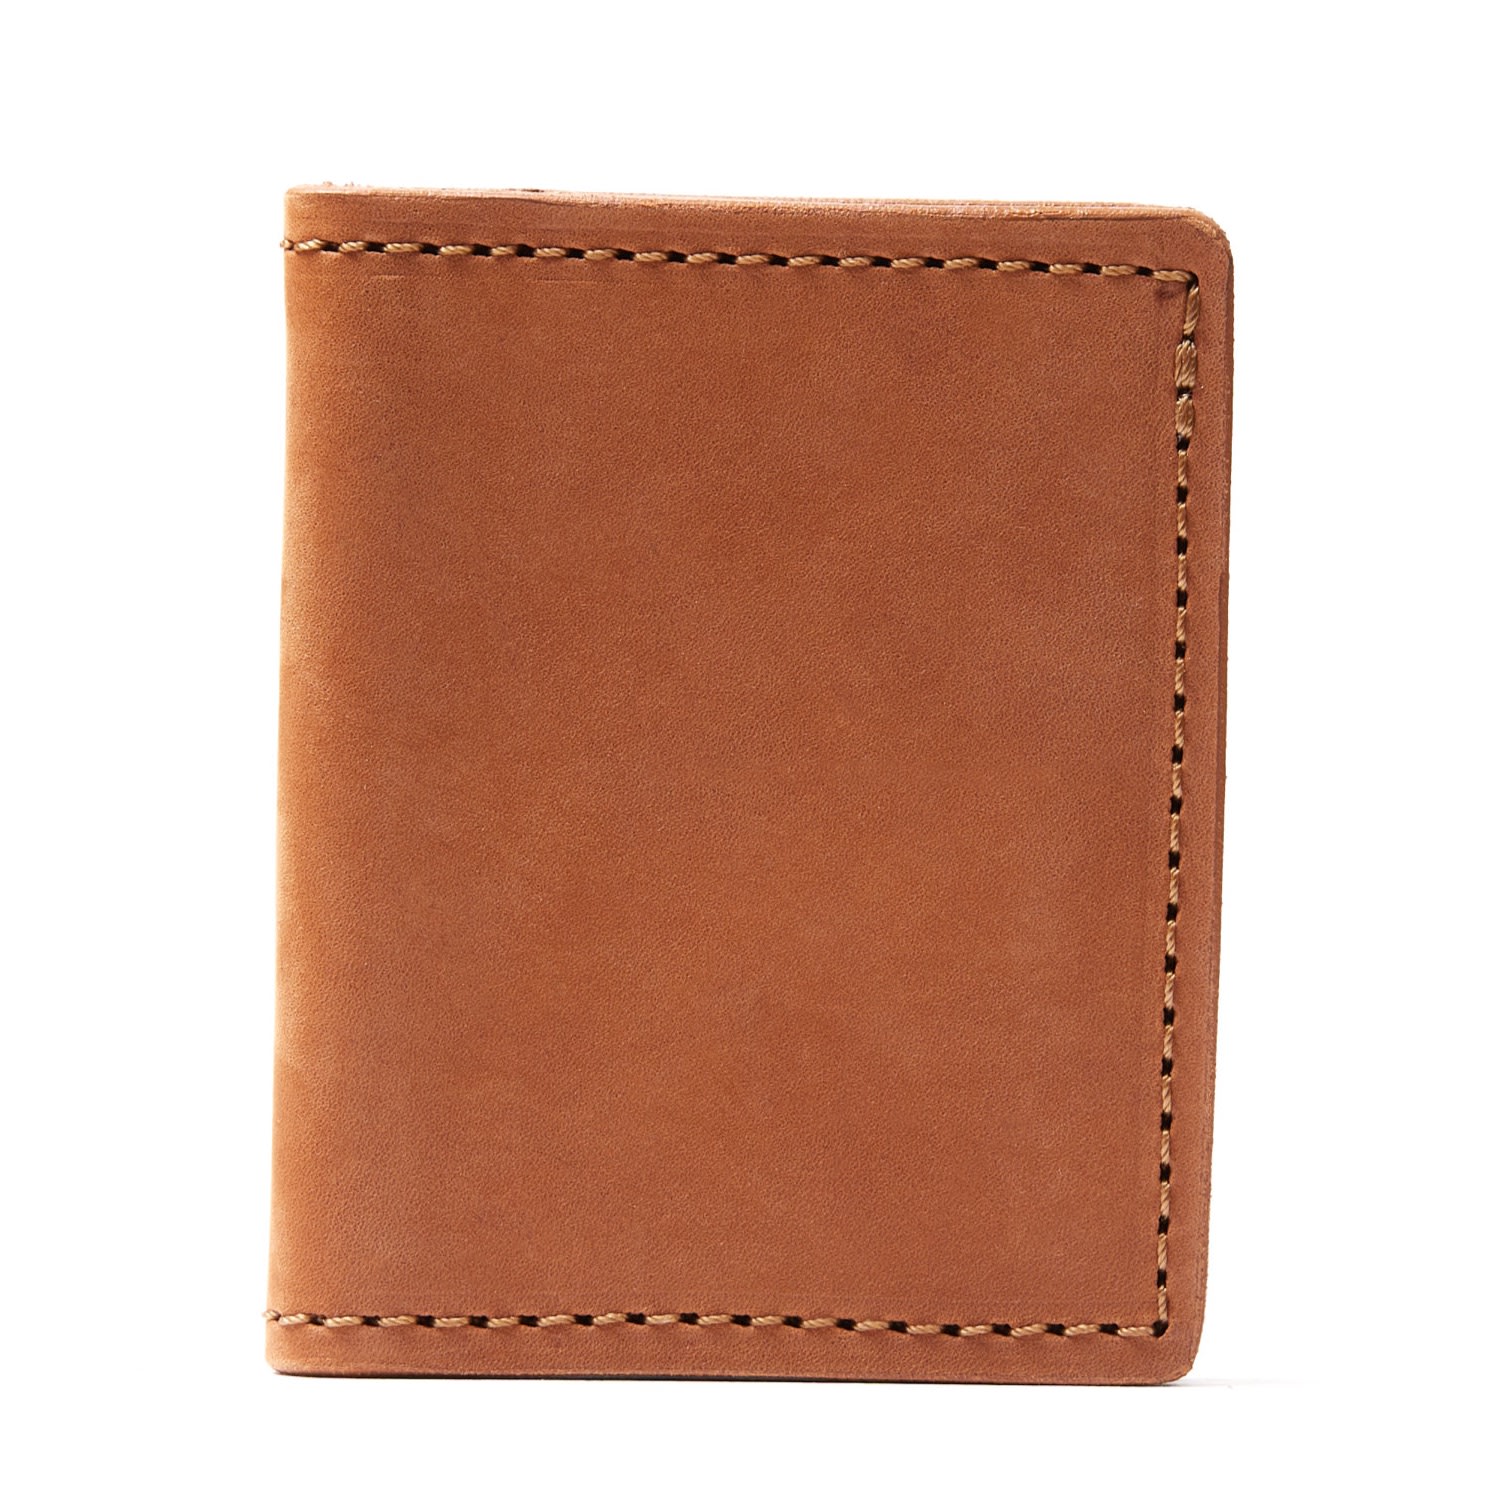 The Dust Company Men's Leather Cardholders In Heritage Brown New York Style